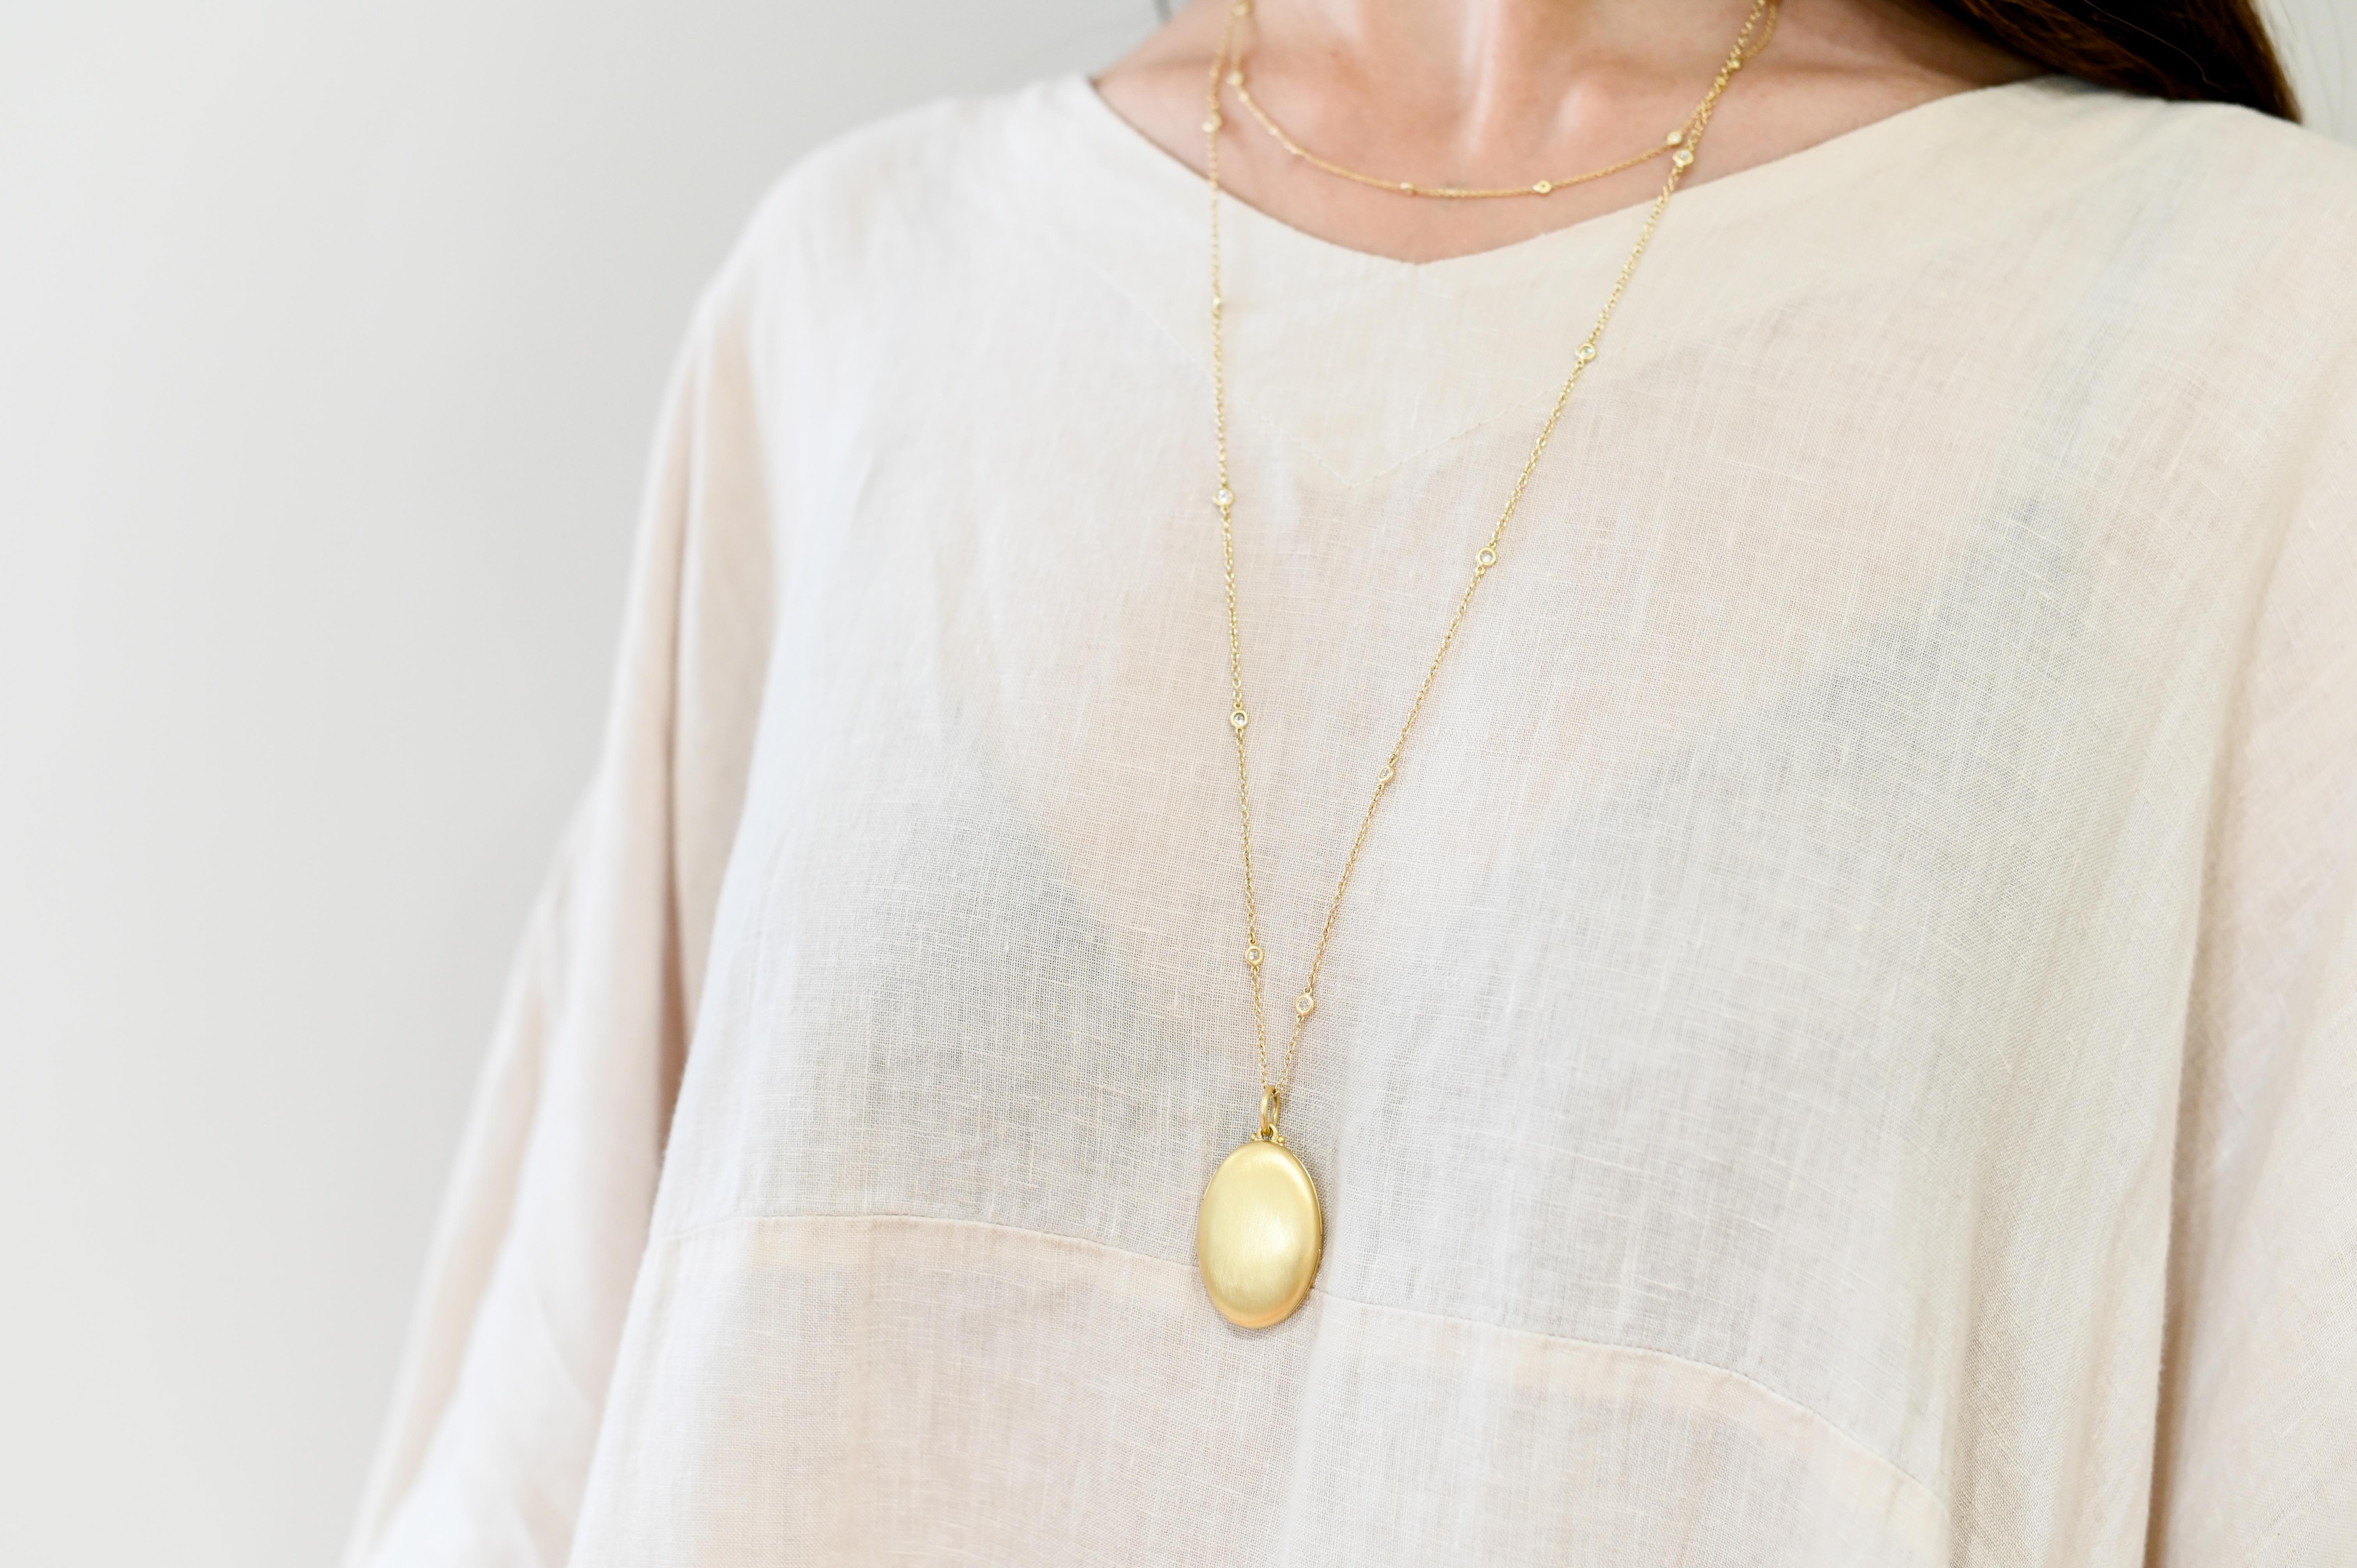 Faye Kim's 18 Karat Gold Large Oval Locket combines both substance and style. FInely handcrafted and matte-finished. Personalize it with an engraving or with gemstones.

Locket Dimensions 1.5 x 1